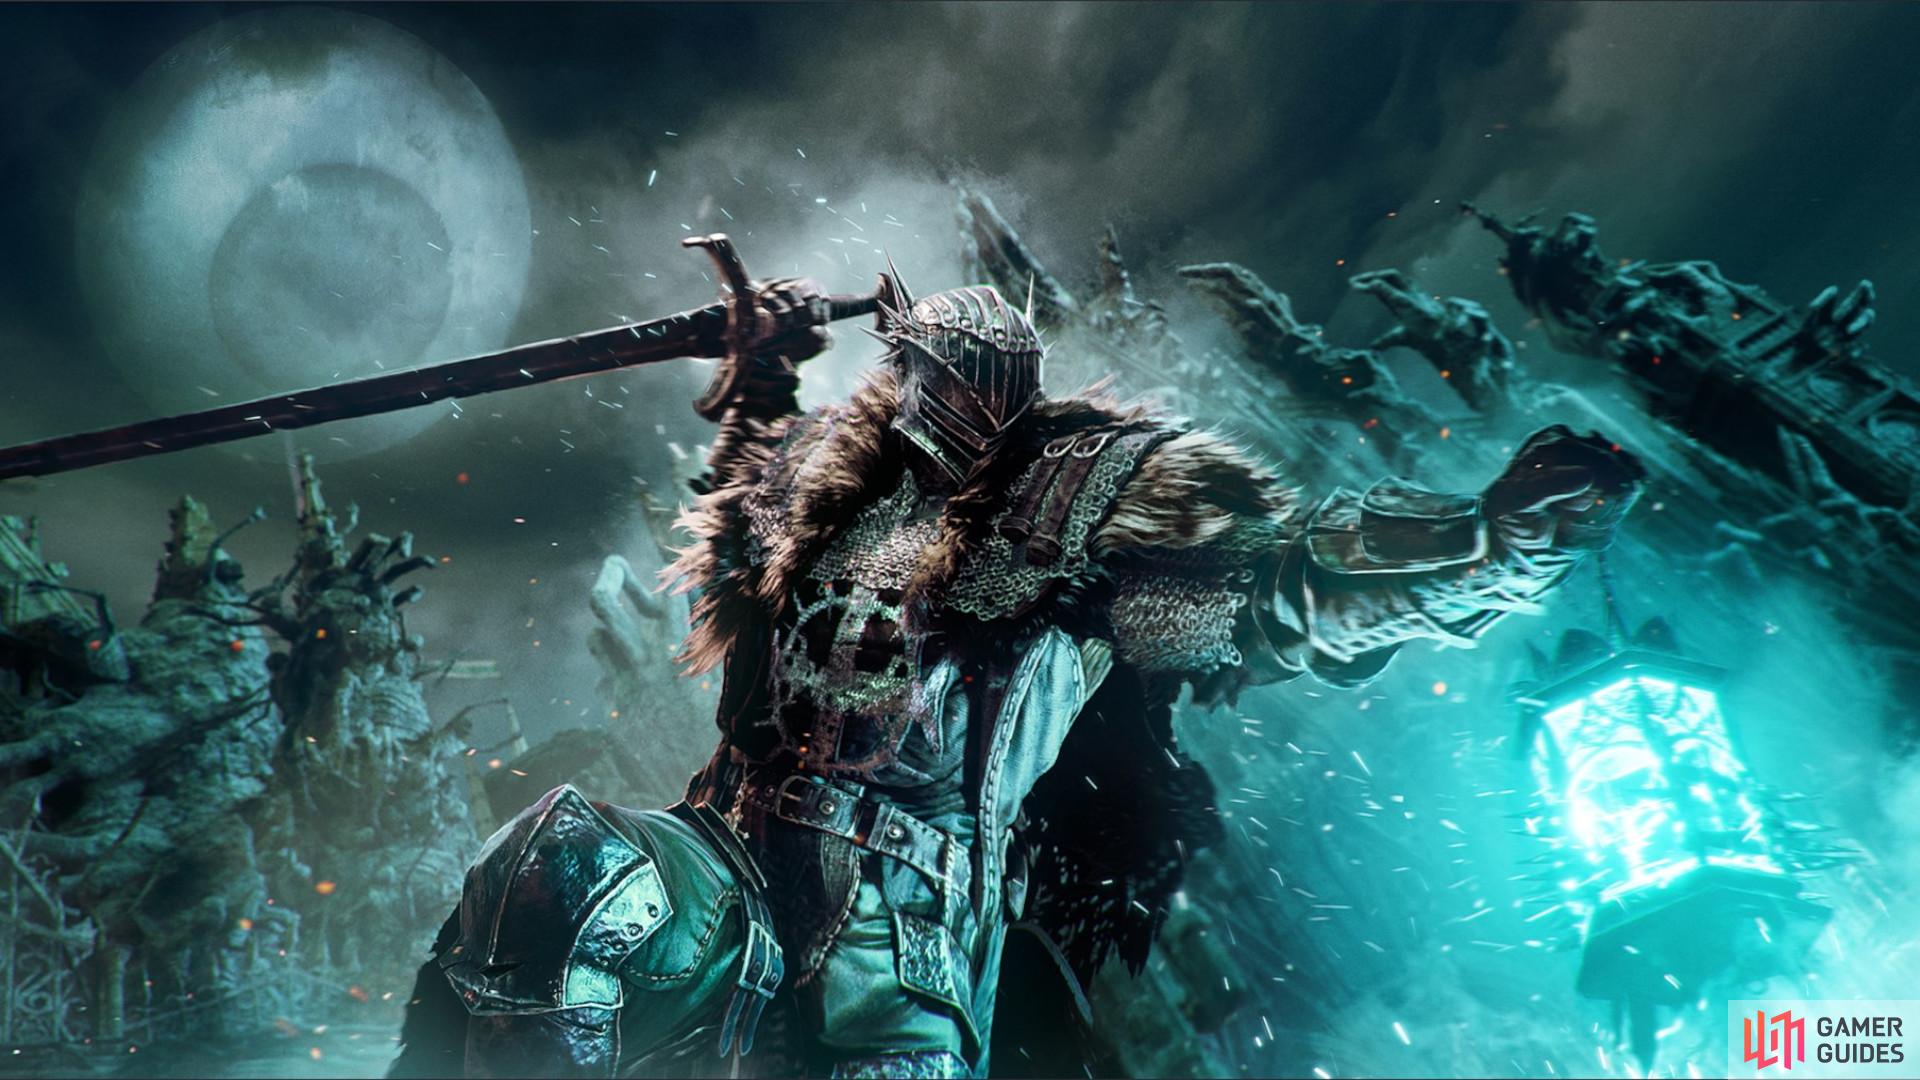 The new Lords of the Fallen takes aim at Elden Ring's massive soulslike  success